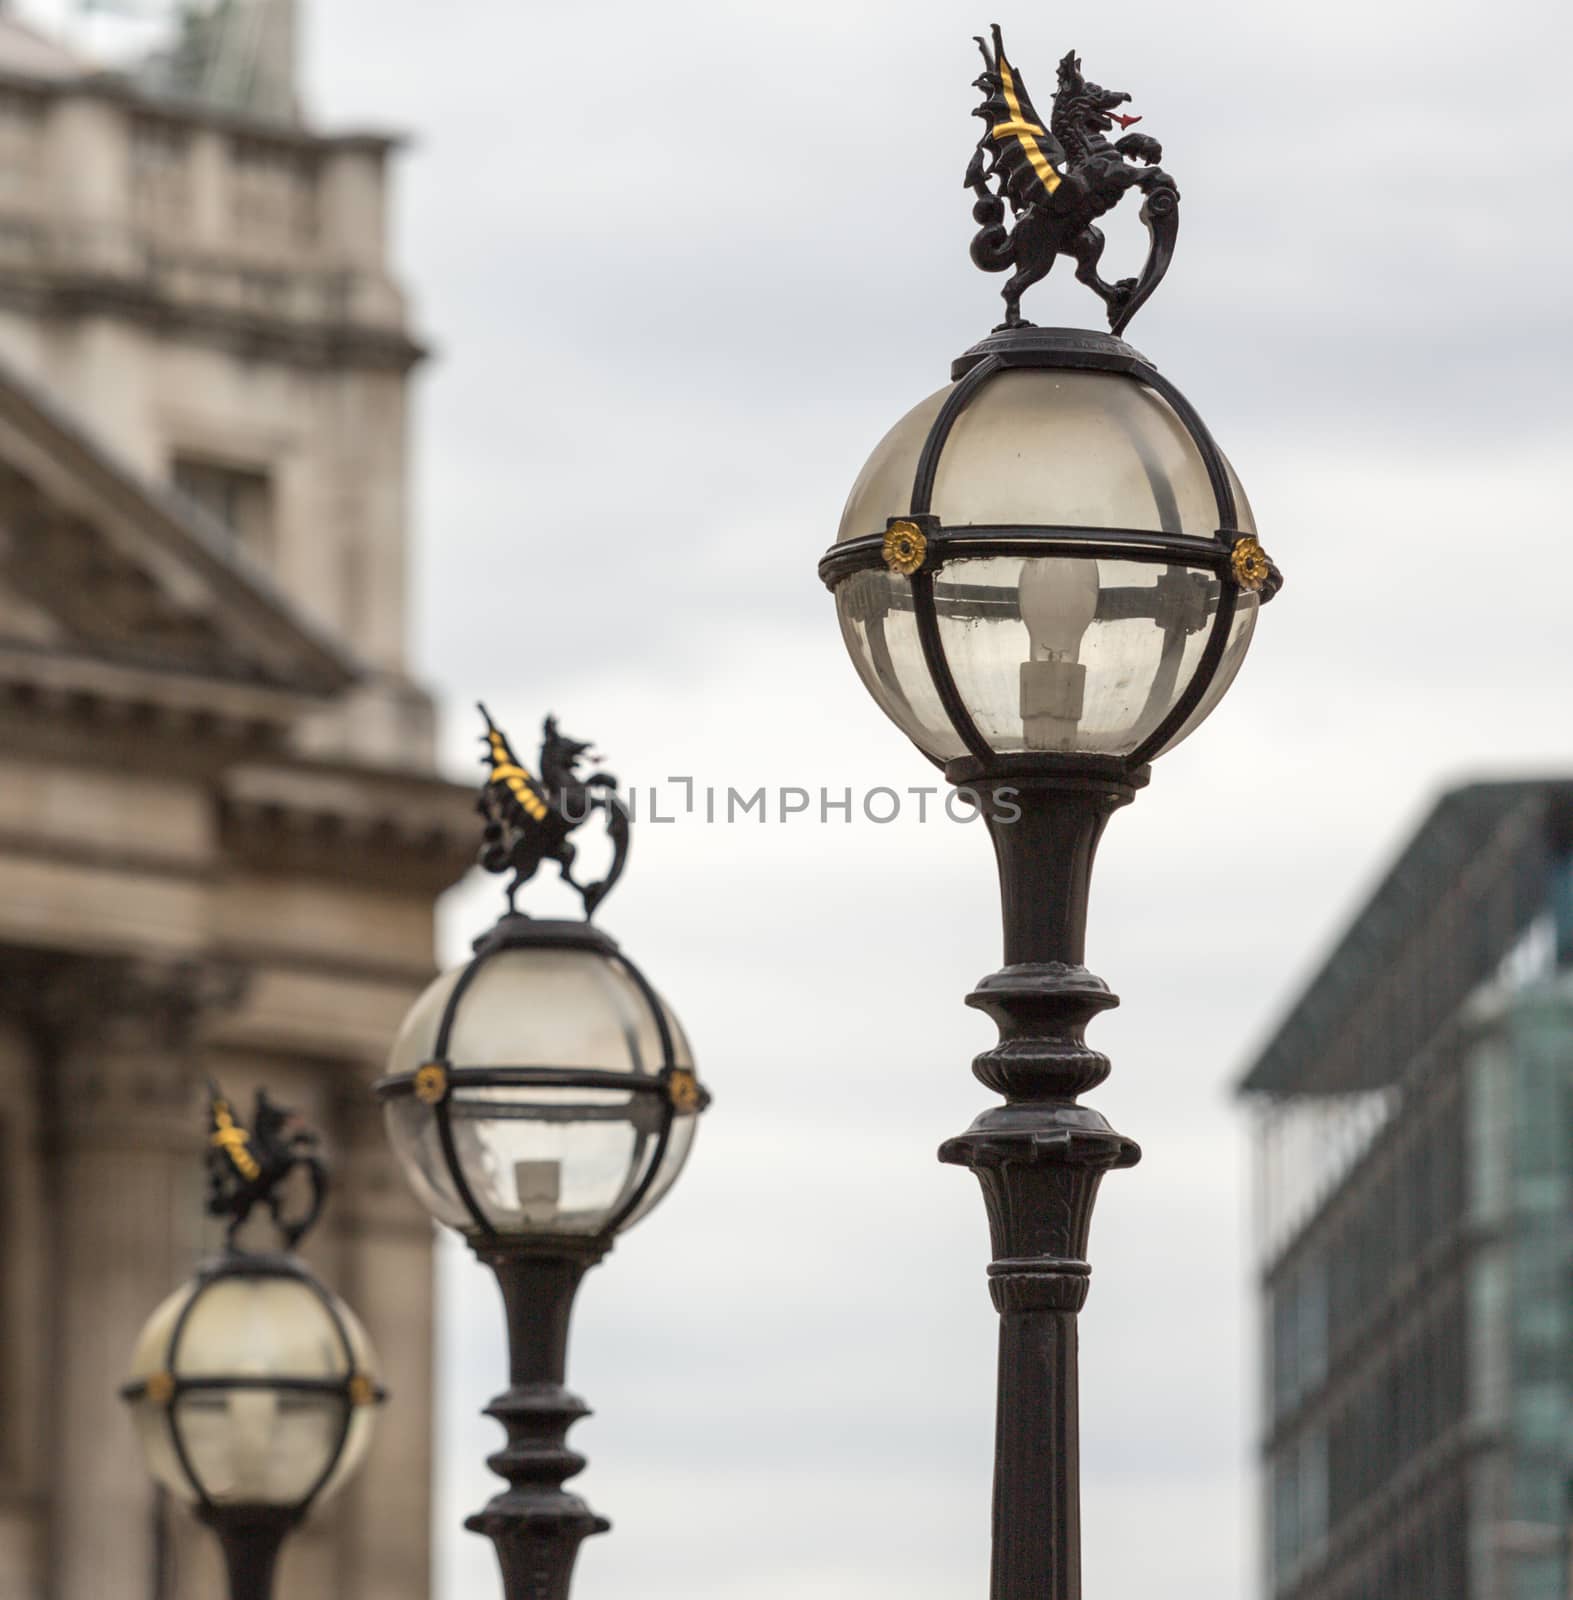 Three in a series of The old City of London Street Lights near t by chrisukphoto